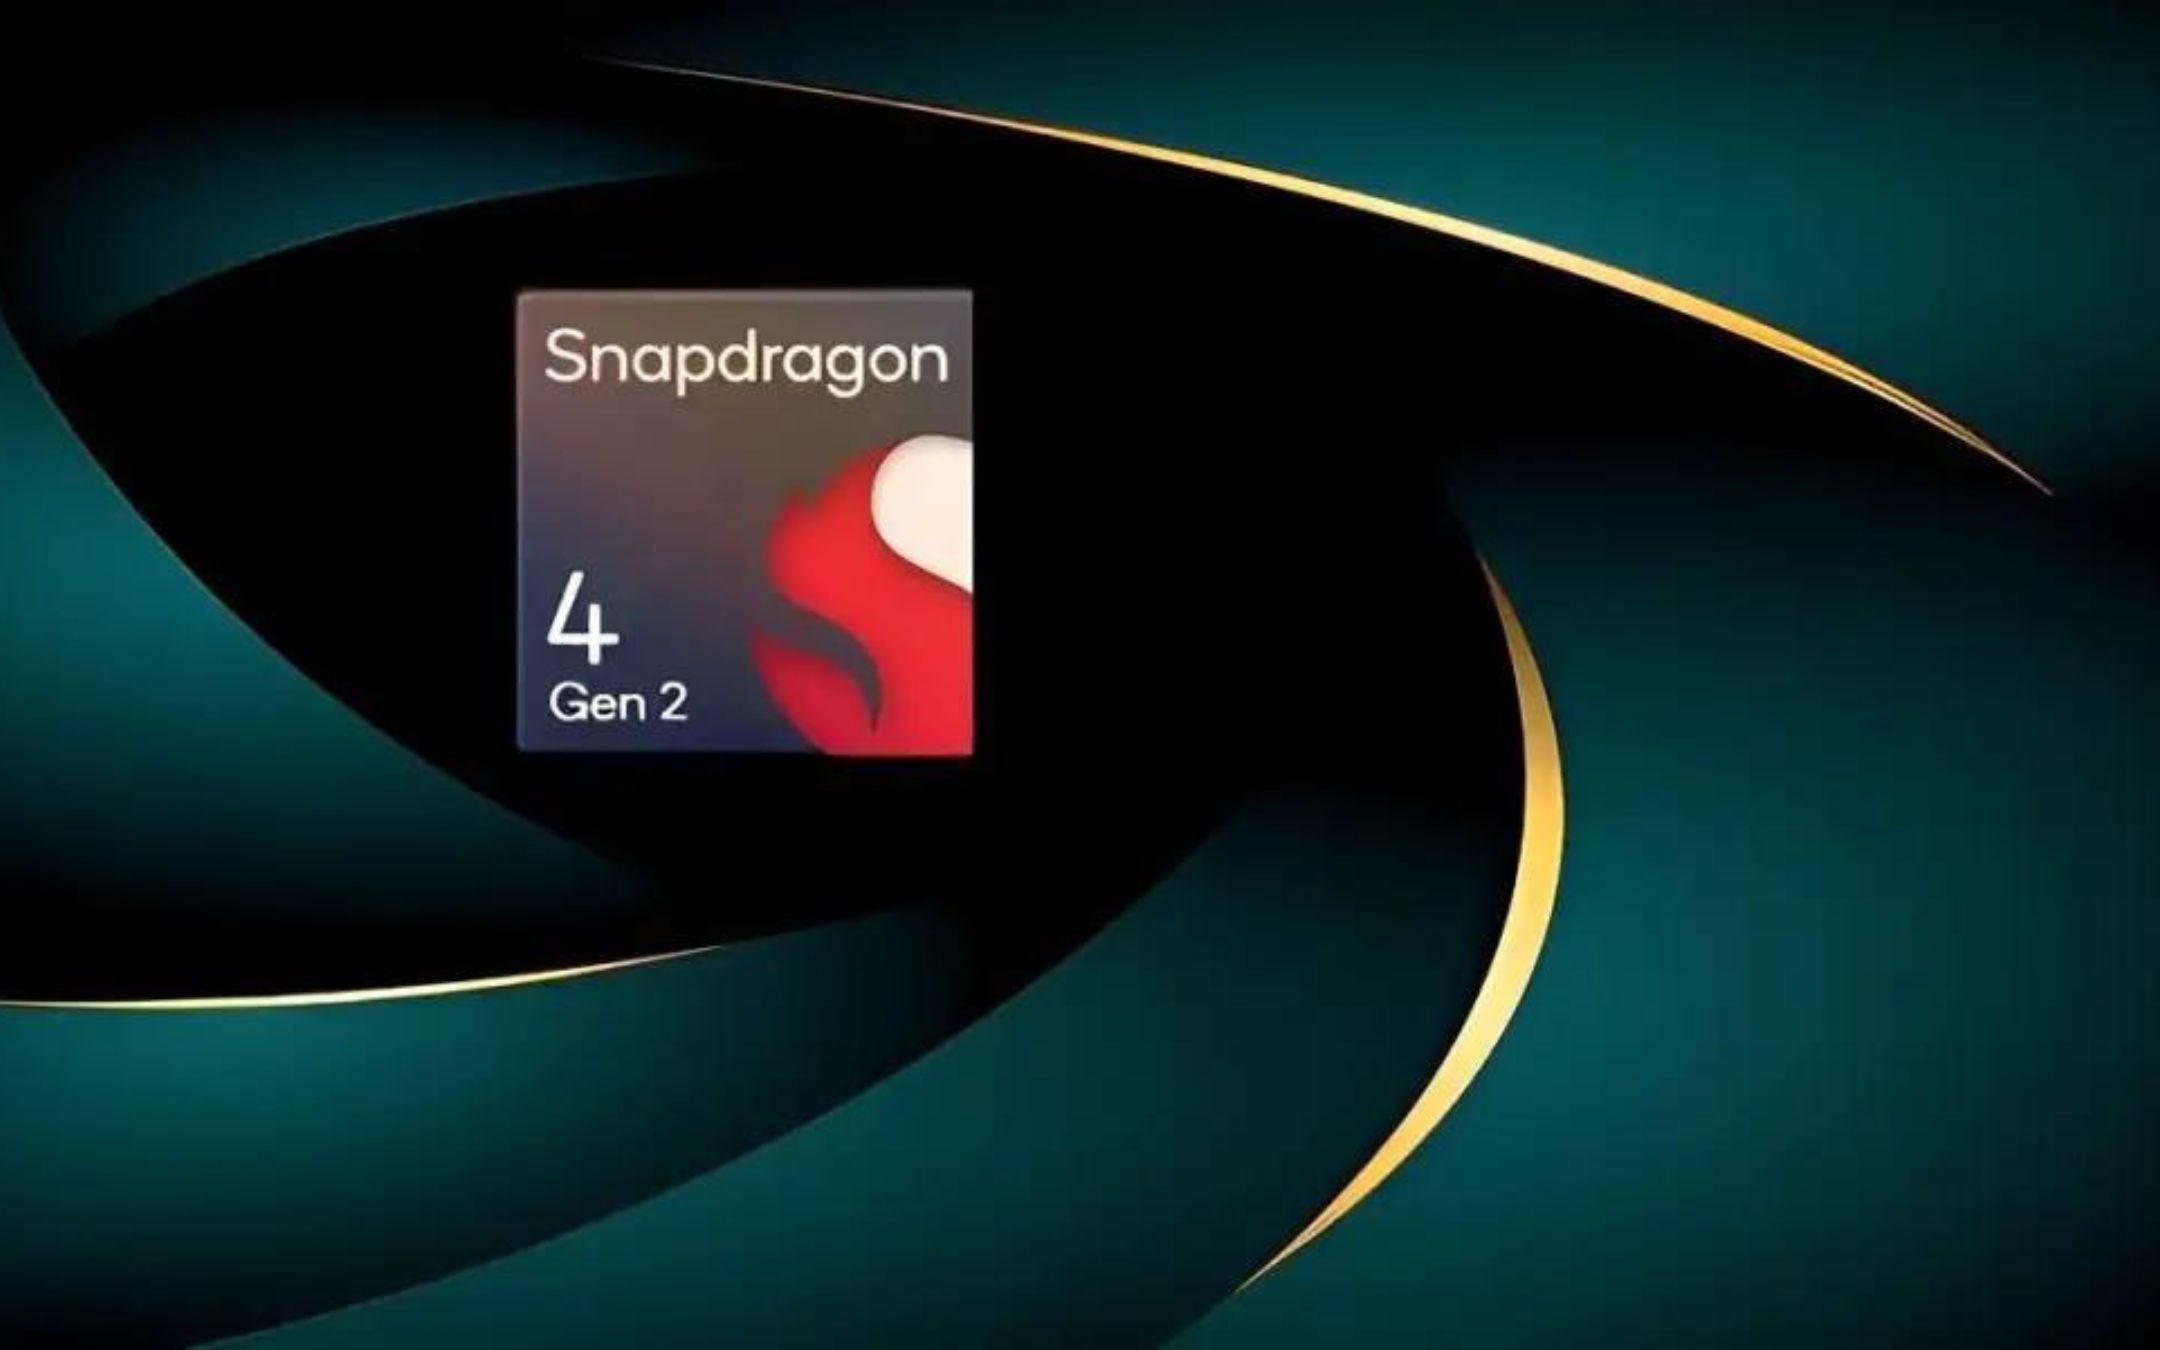 Qualcomm, the new Snapdragon 4 Gen 2 chip is official